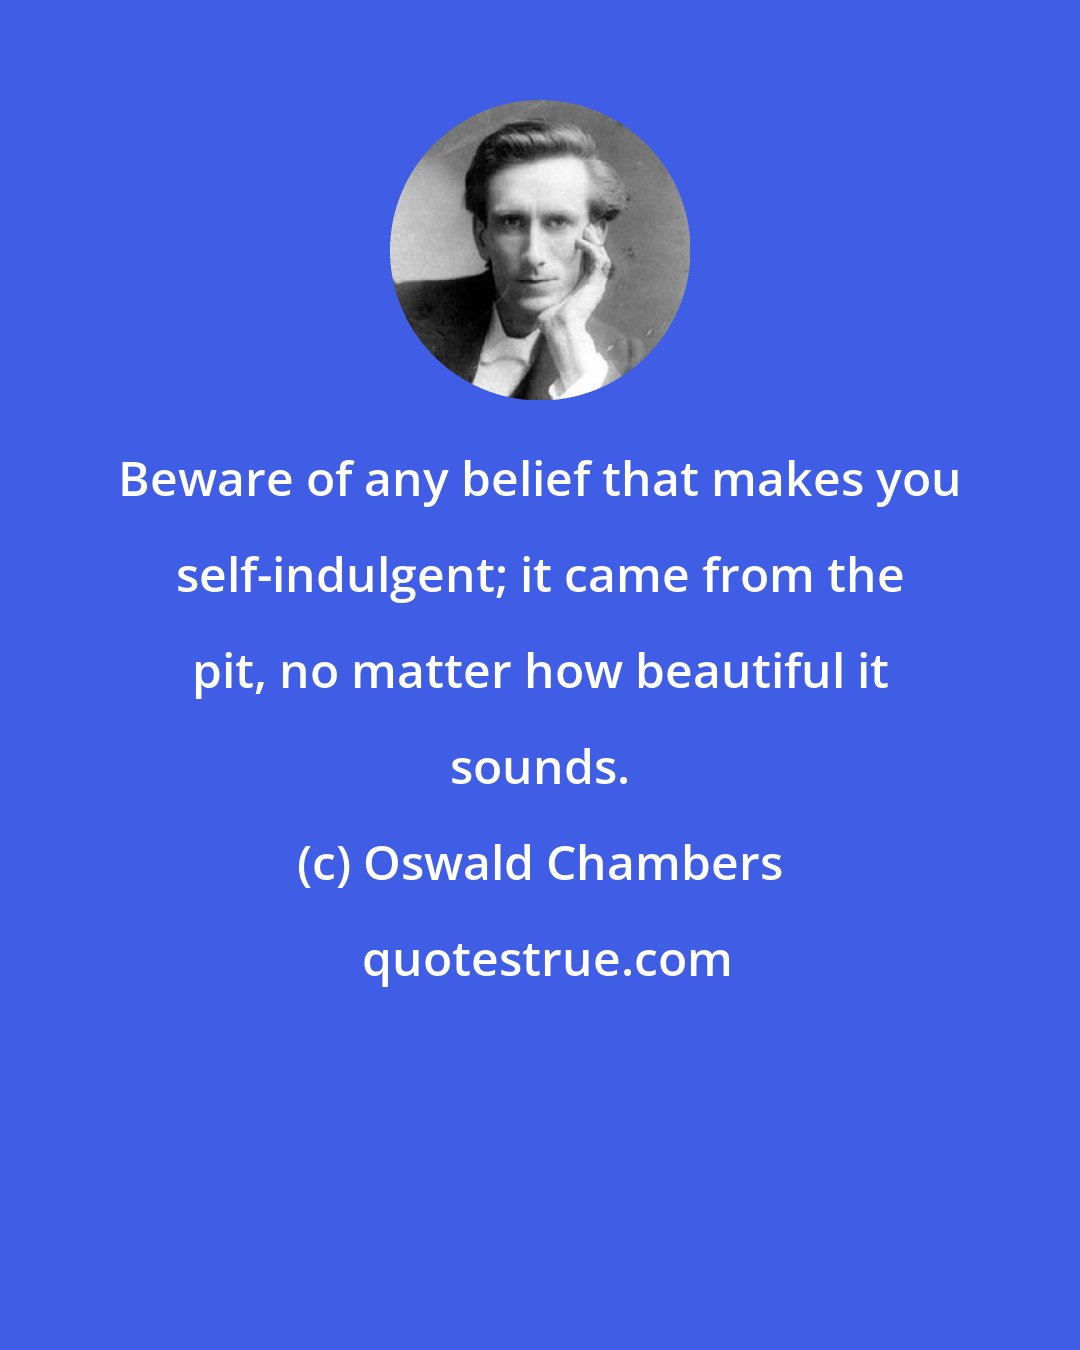 Oswald Chambers: Beware of any belief that makes you self-indulgent; it came from the pit, no matter how beautiful it sounds.